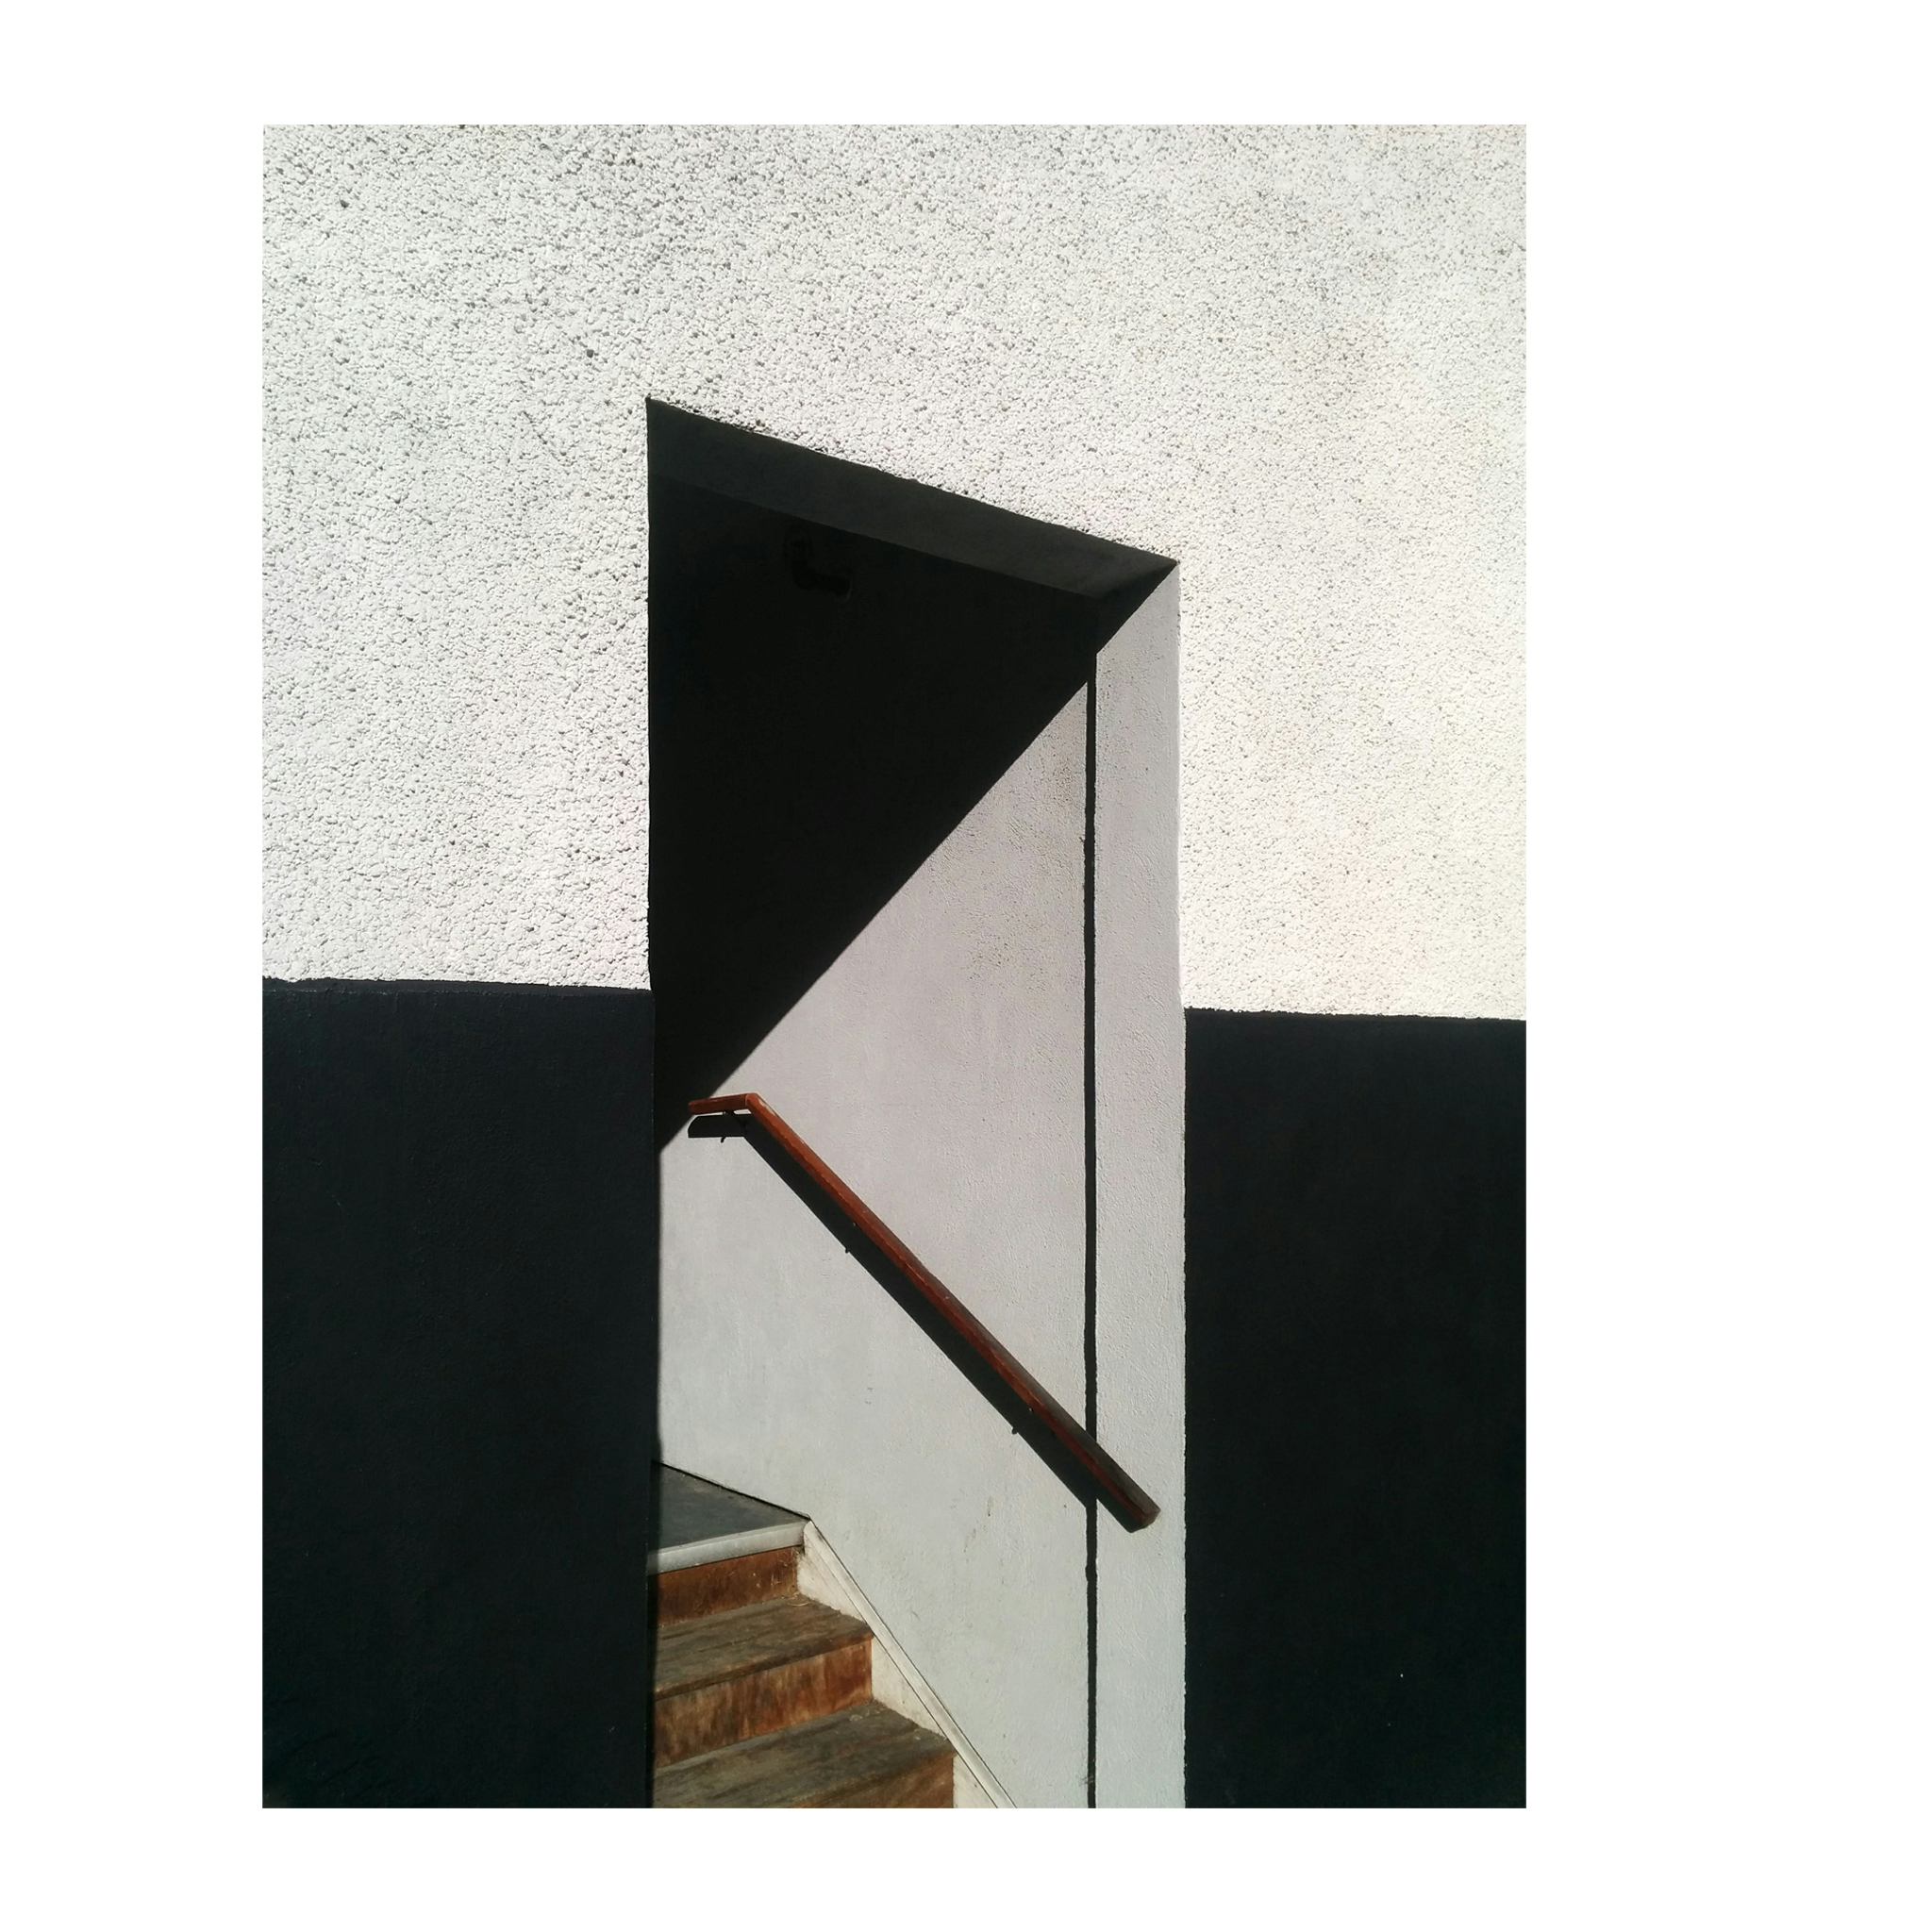 door way presents the opposites of shadow on a white wall